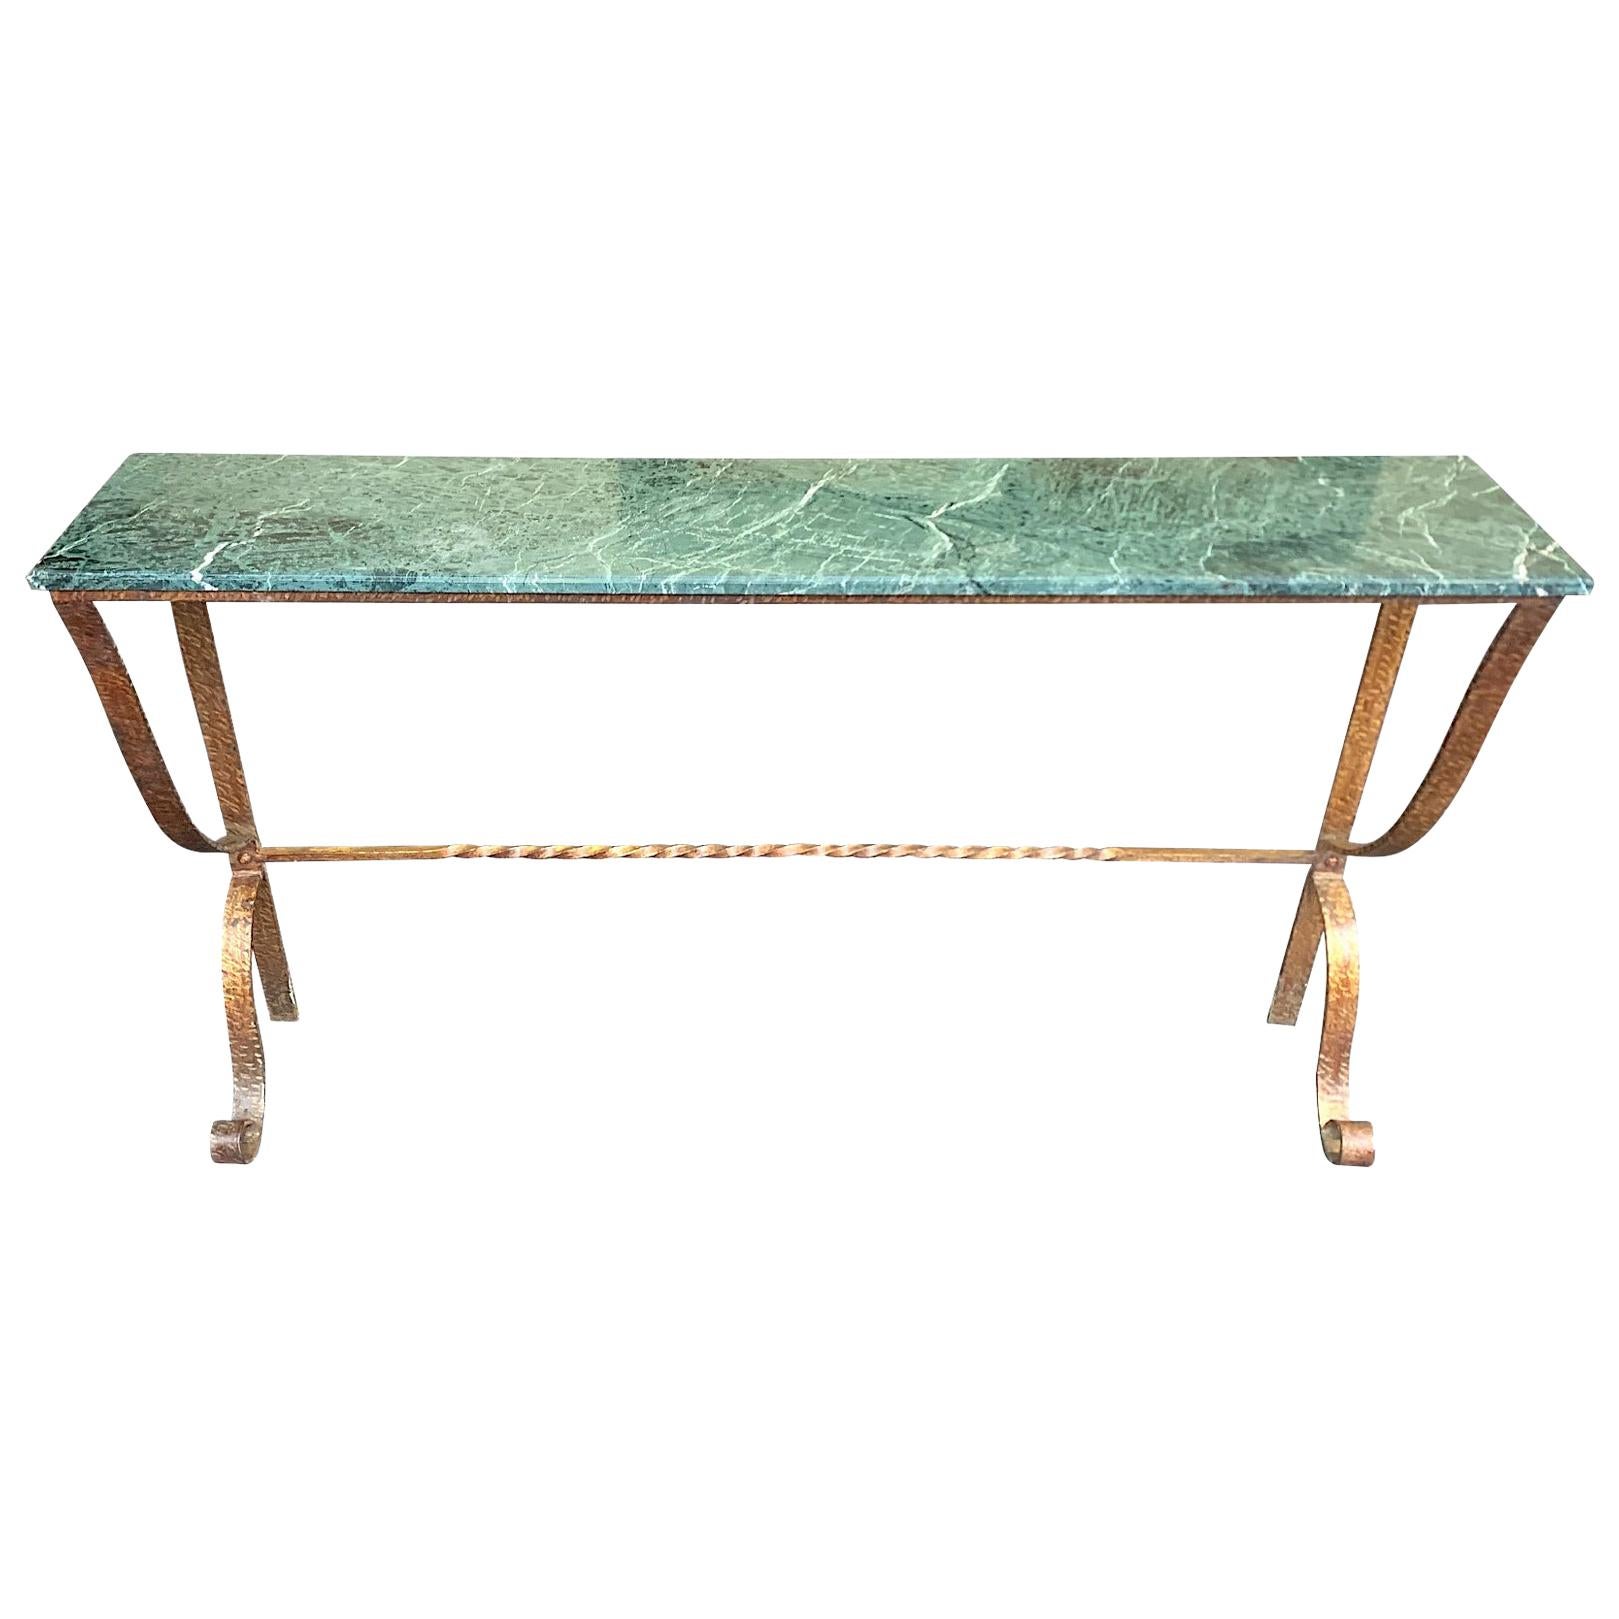 Decorative Spanish 1950s Wrought Iron Gilt Console with Green Marble Top